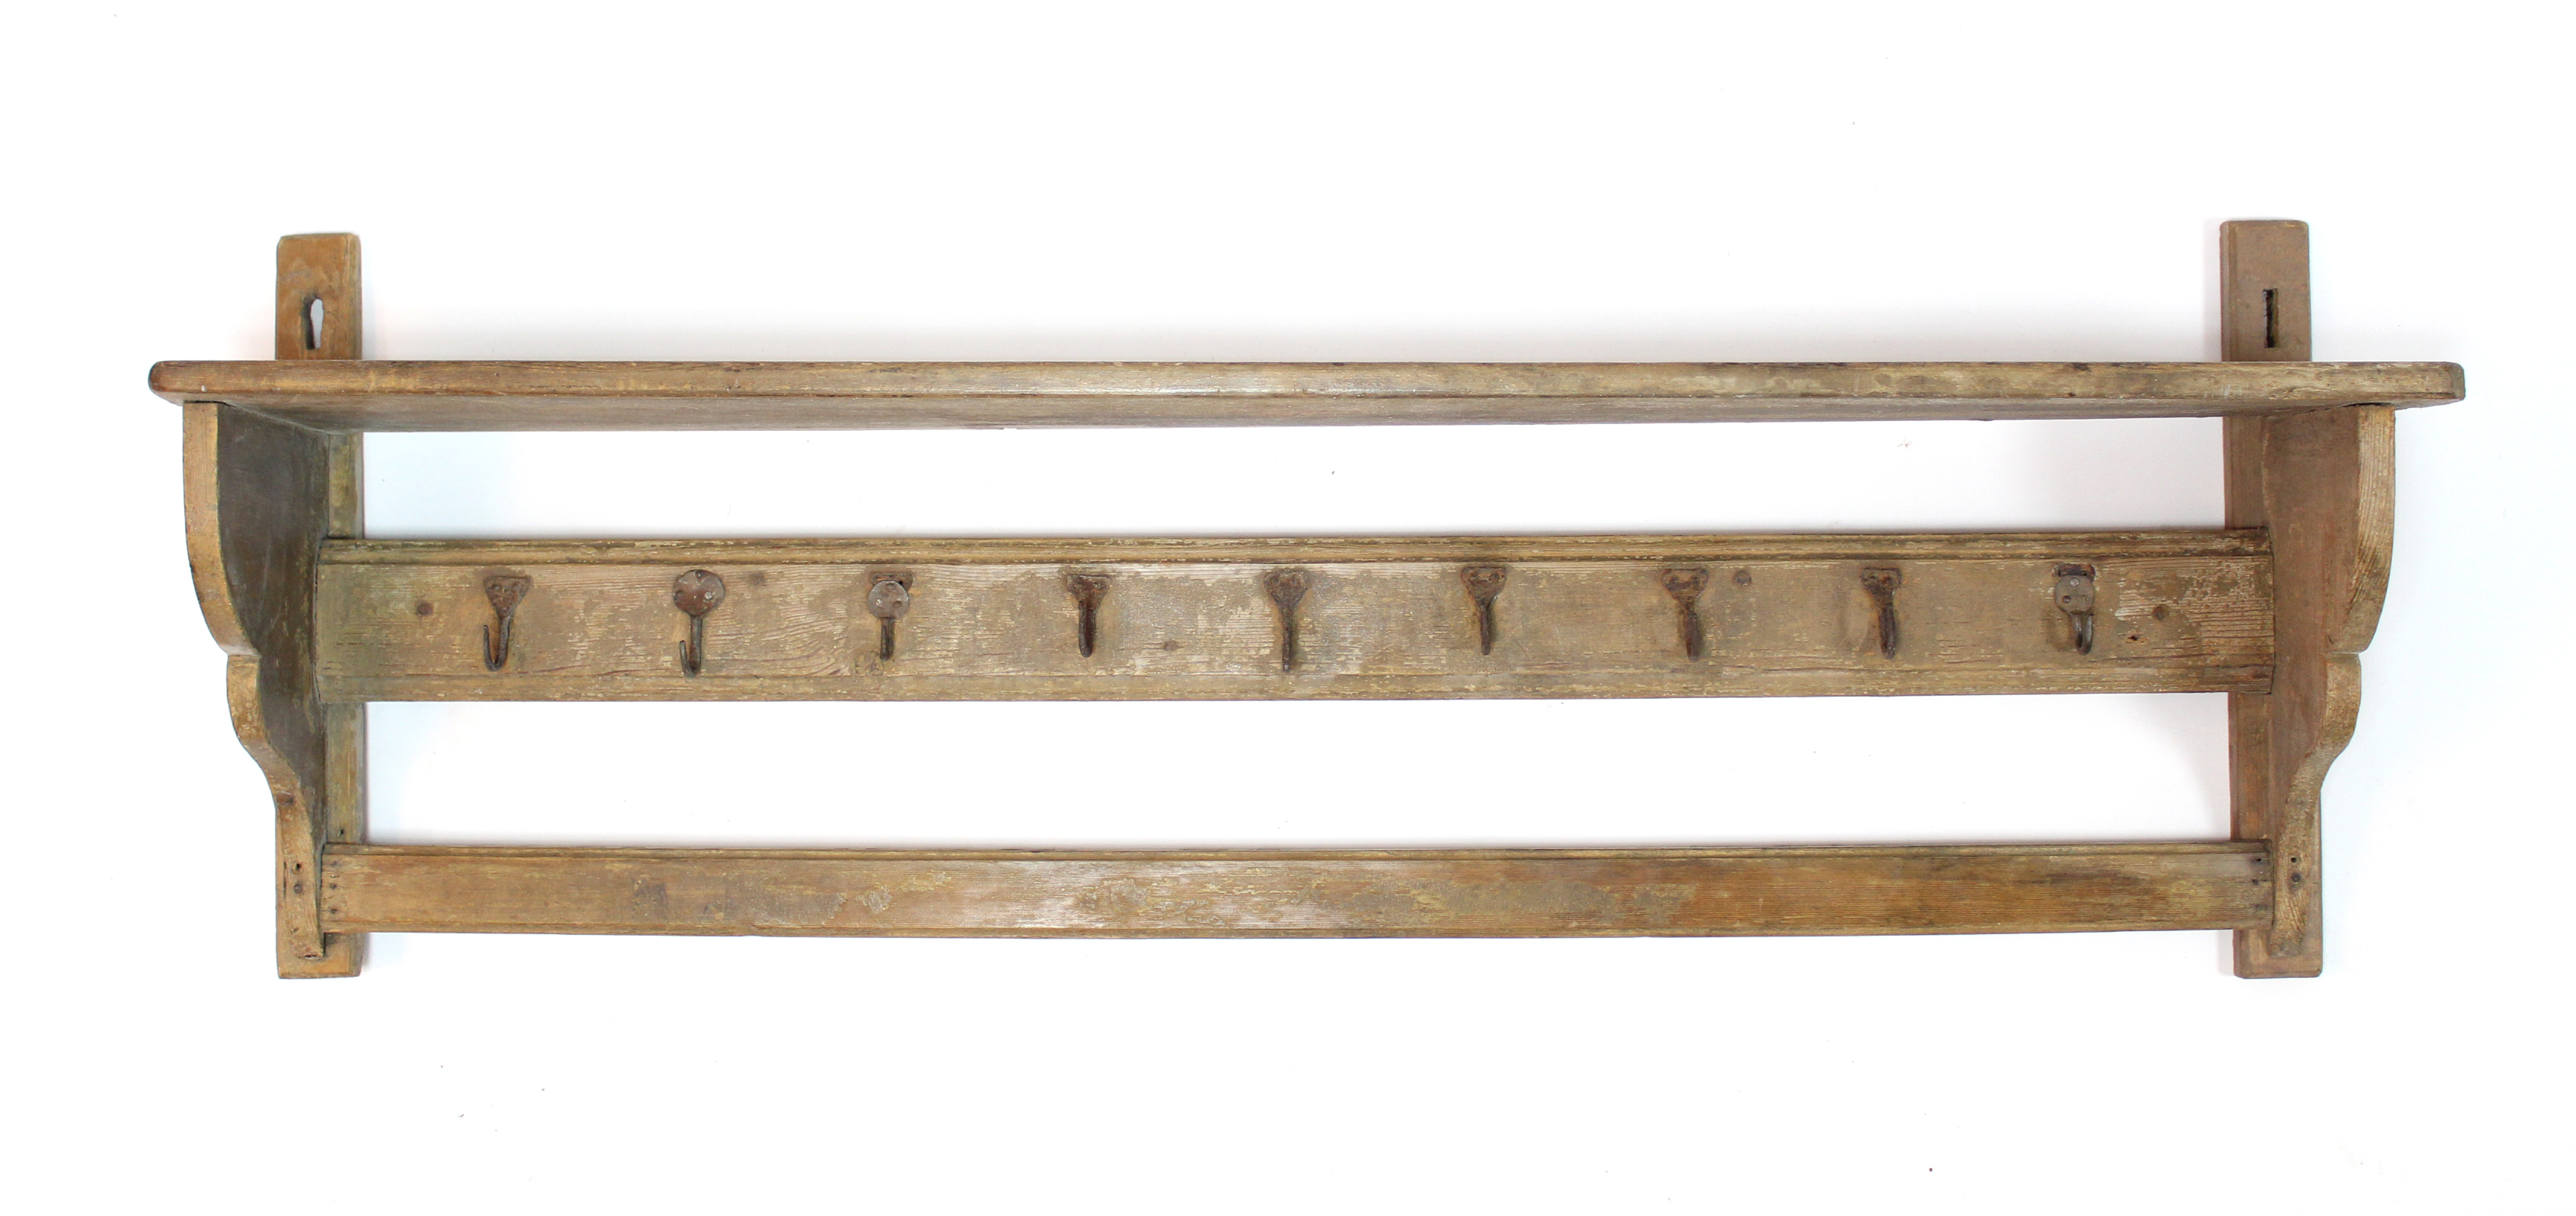 A Victorian painted pine kitchen wall shelf with hanging rack below, having nine wrought iron hooks;